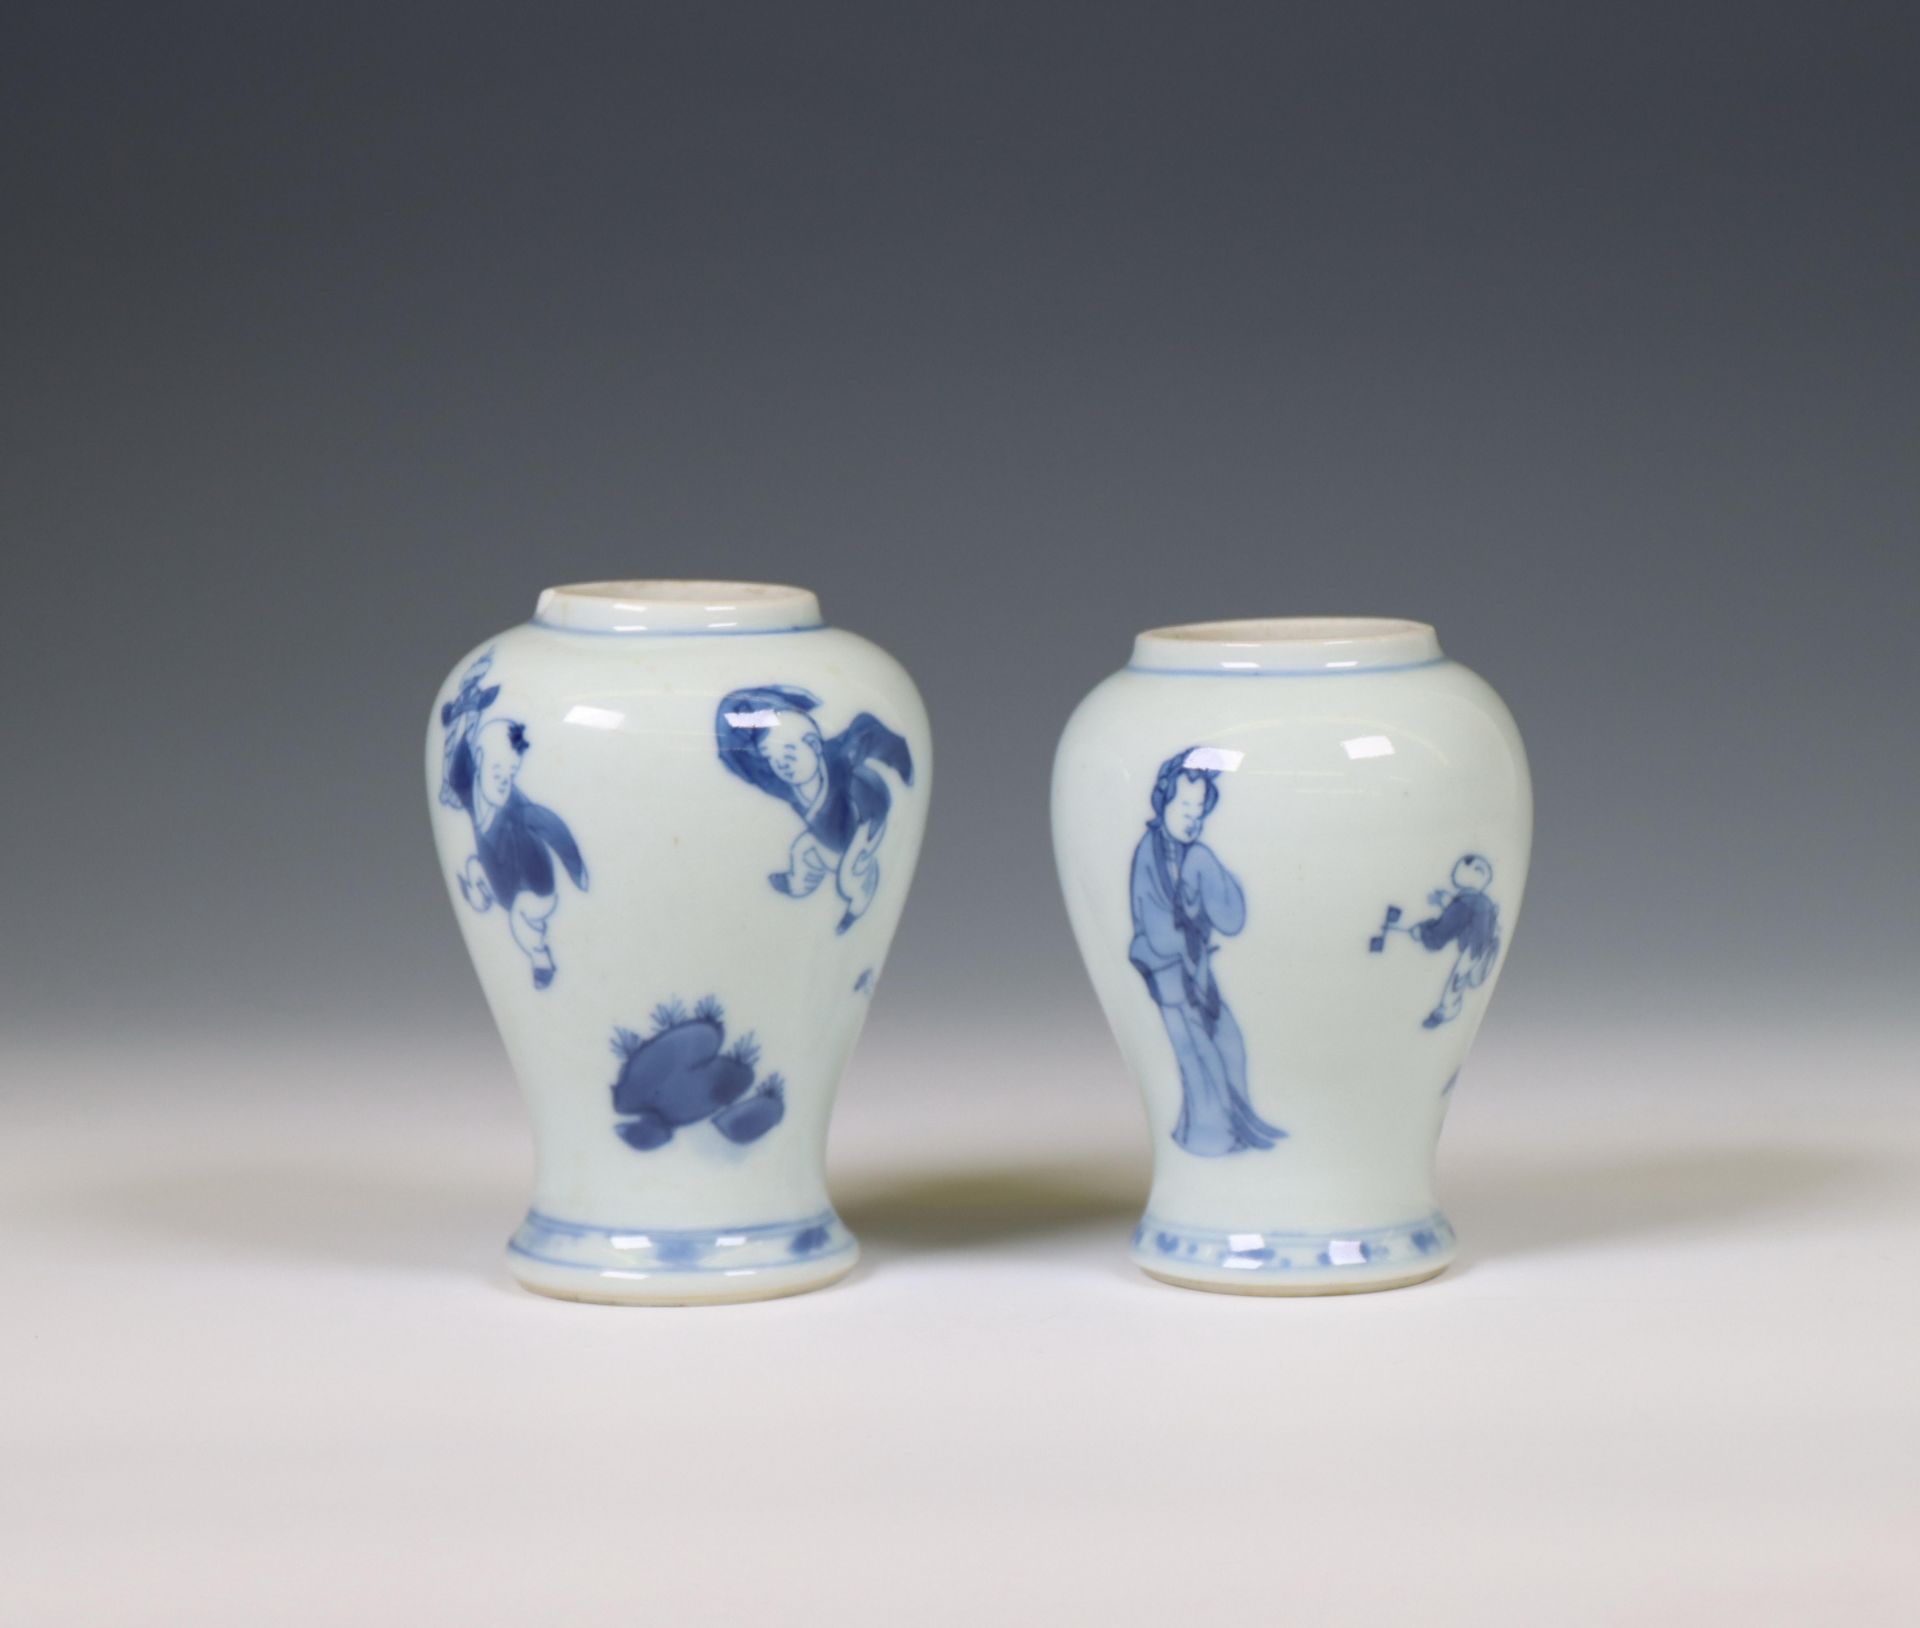 China, two blue and white porcelain jarlets, Kangxi period (1662-1722),